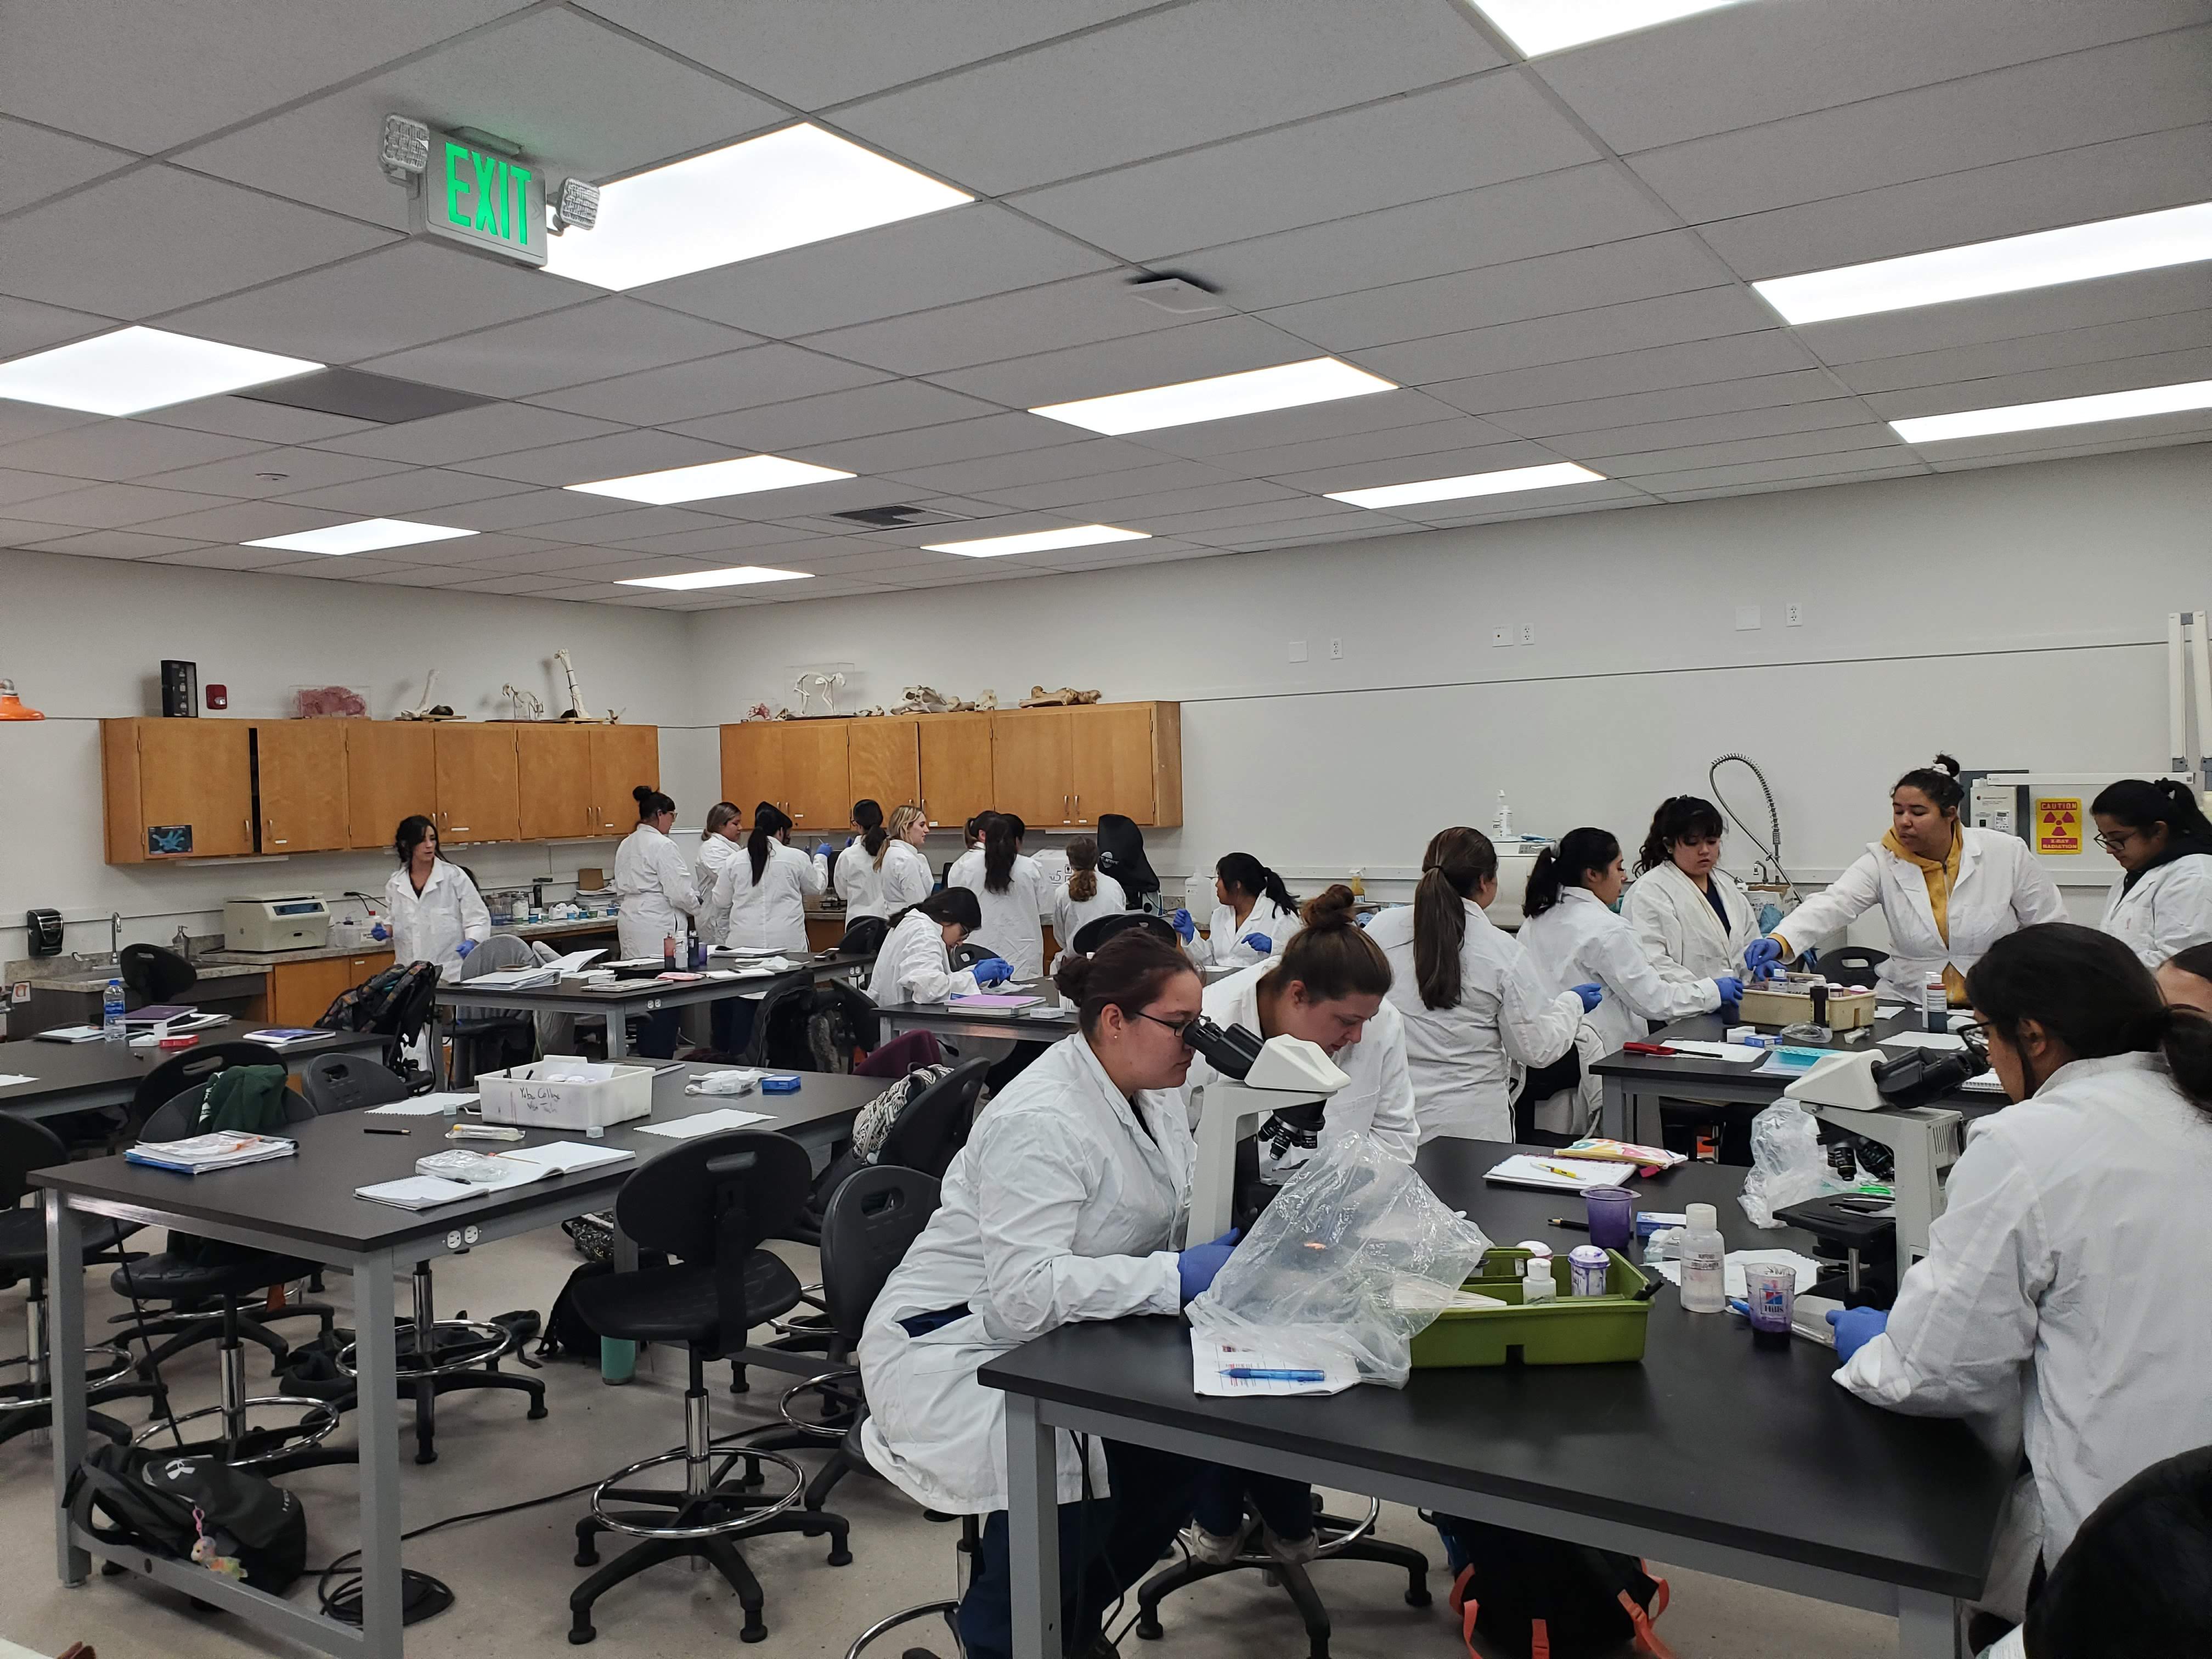 Students in the classroom wearing lab coats using microscopes